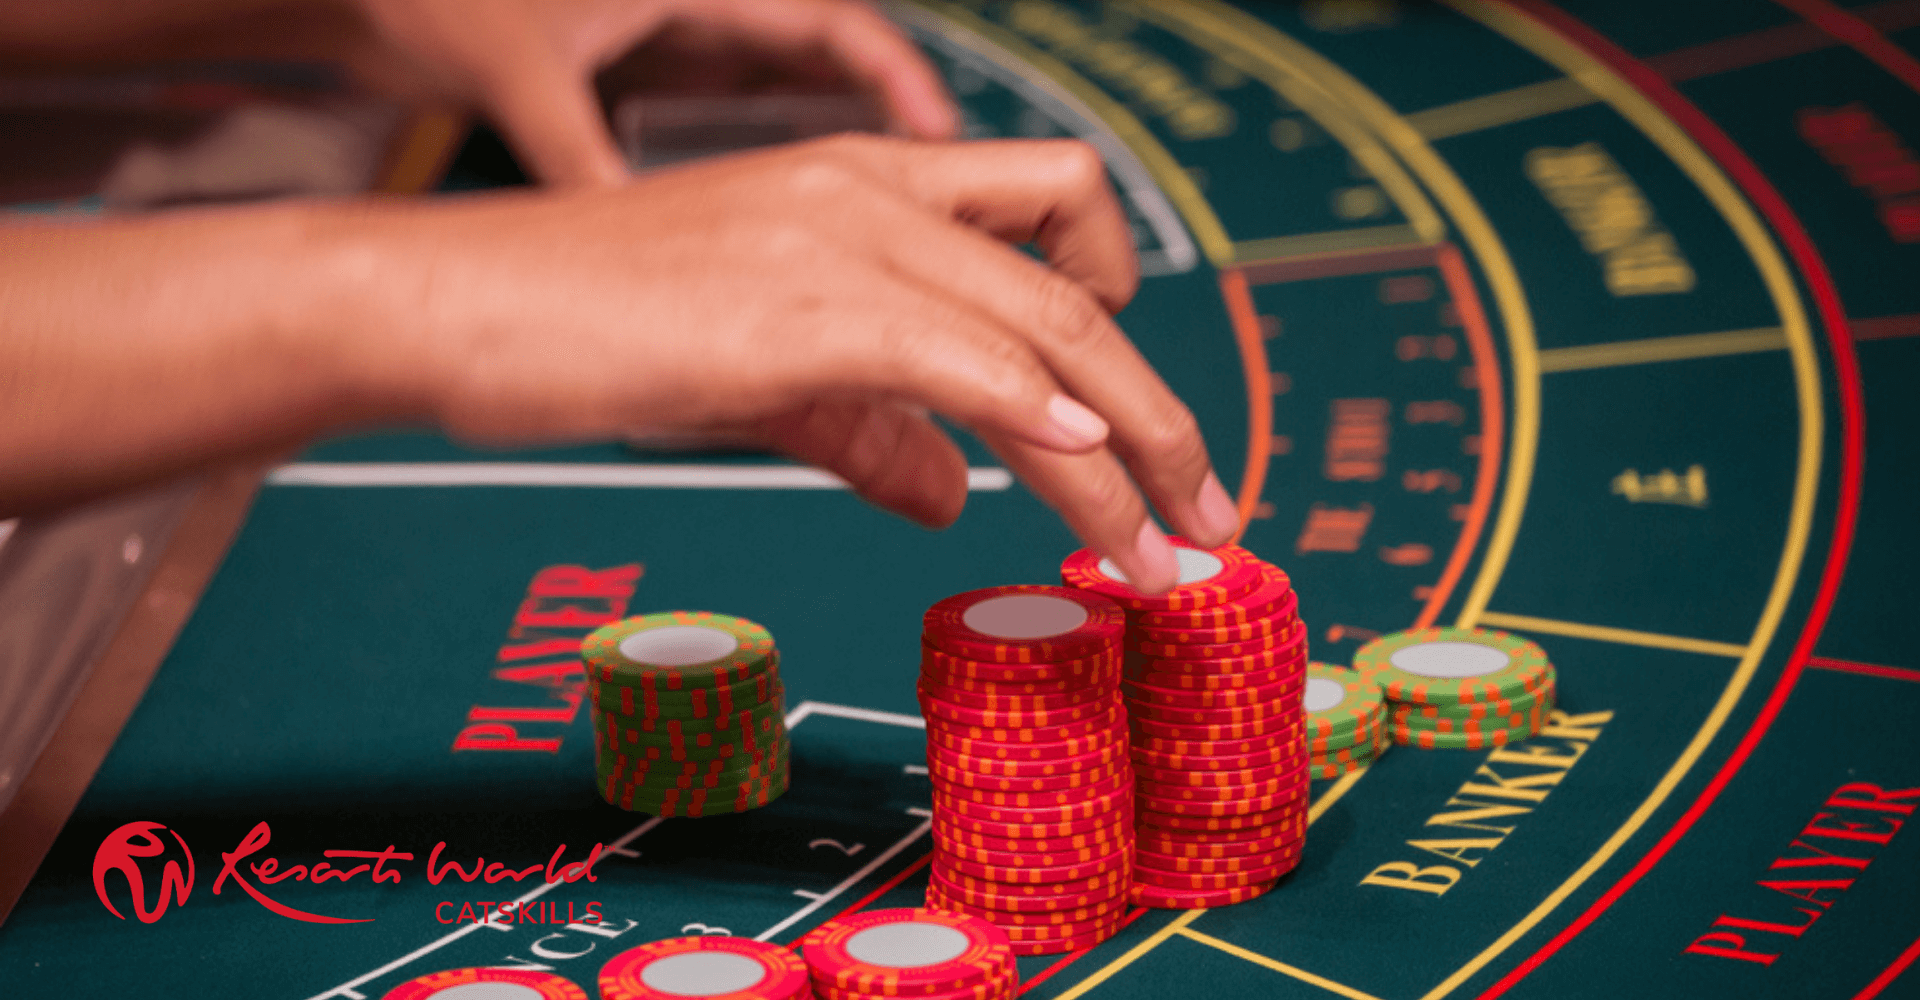 Acquire Baccarat Winners Strategy for Success